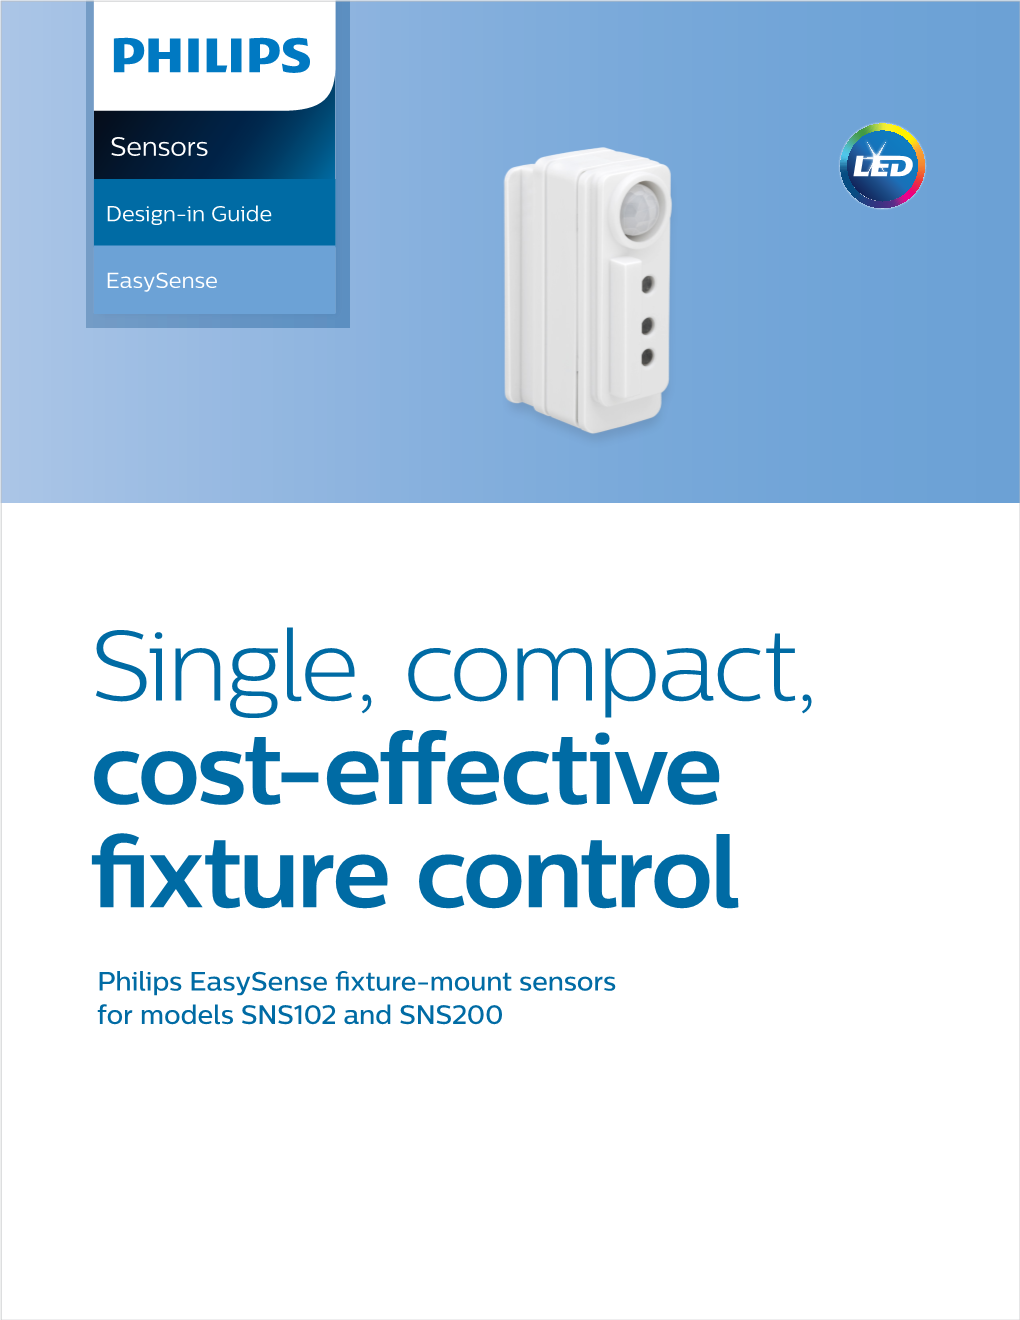 Single, Compact, Cost-Effective Fixture Control